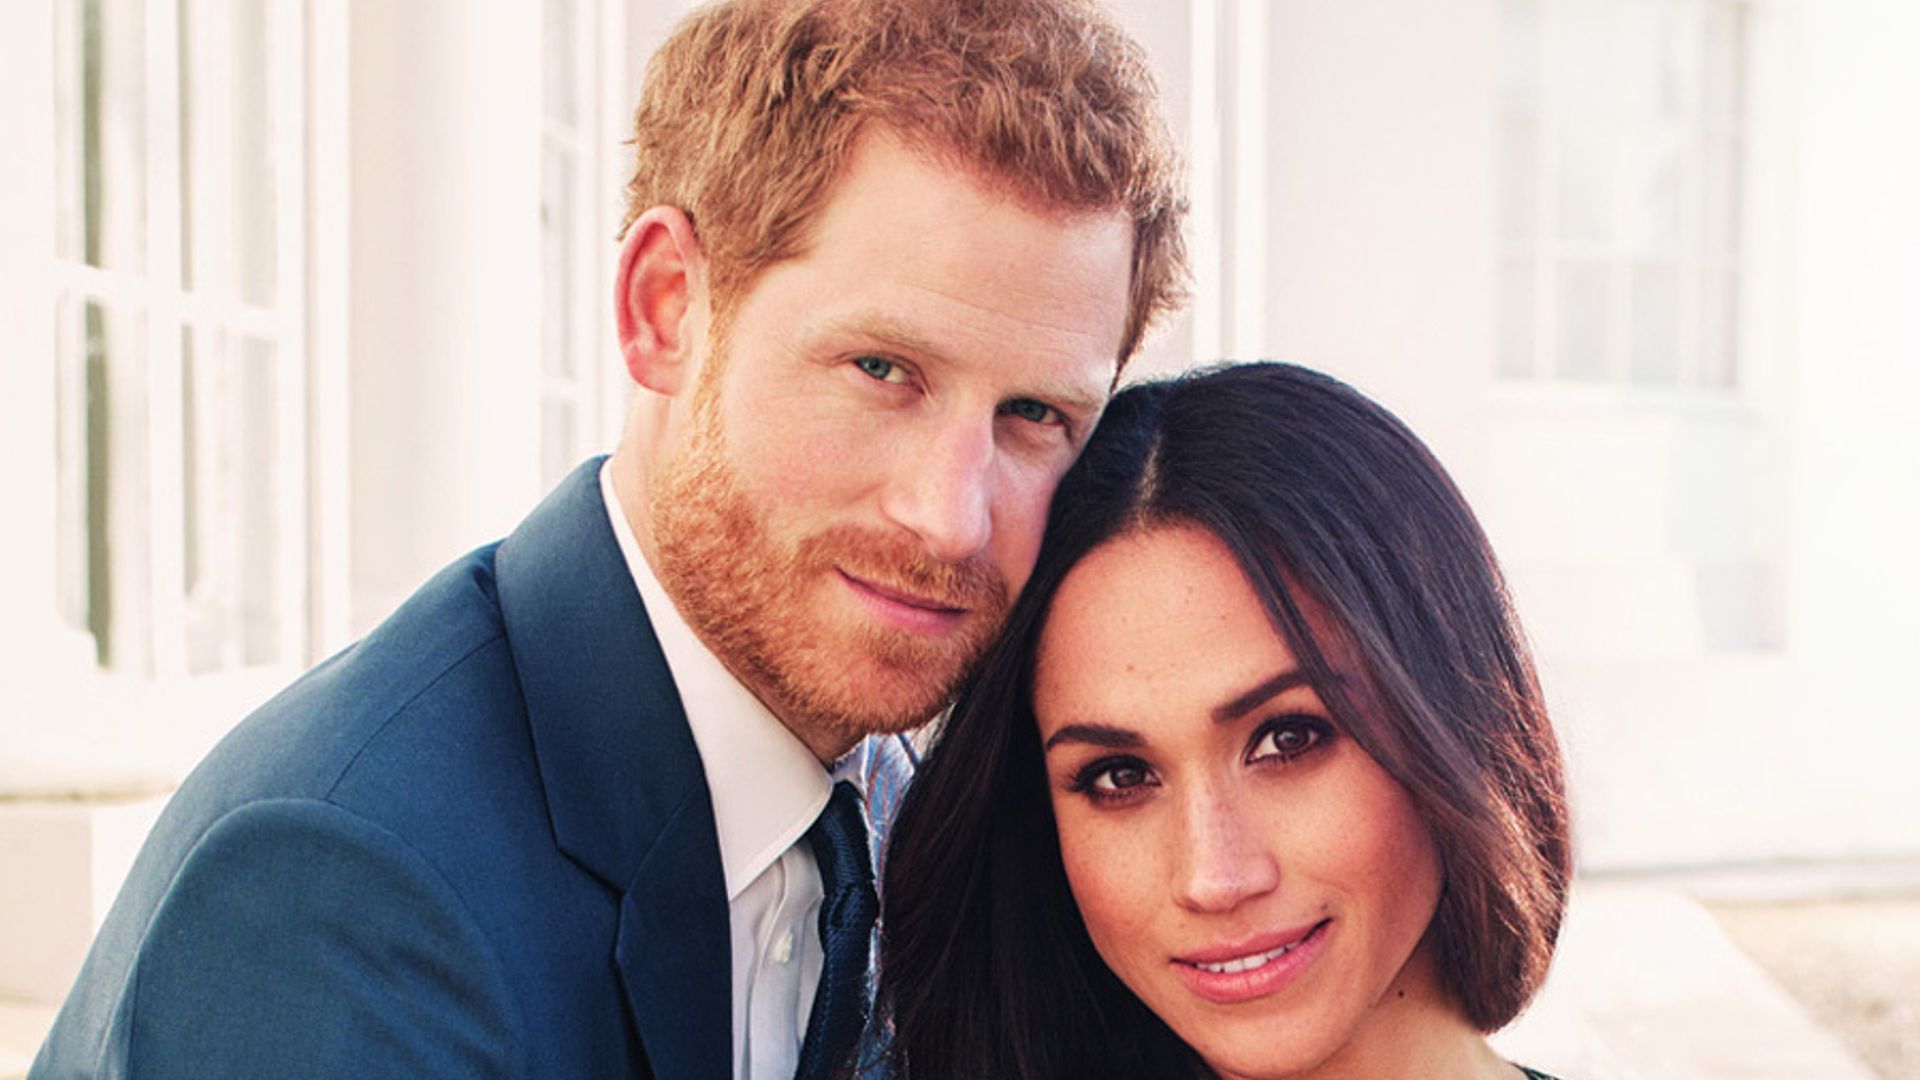 Prince Harry and Meghan Markle stun in three newly released engagement photos